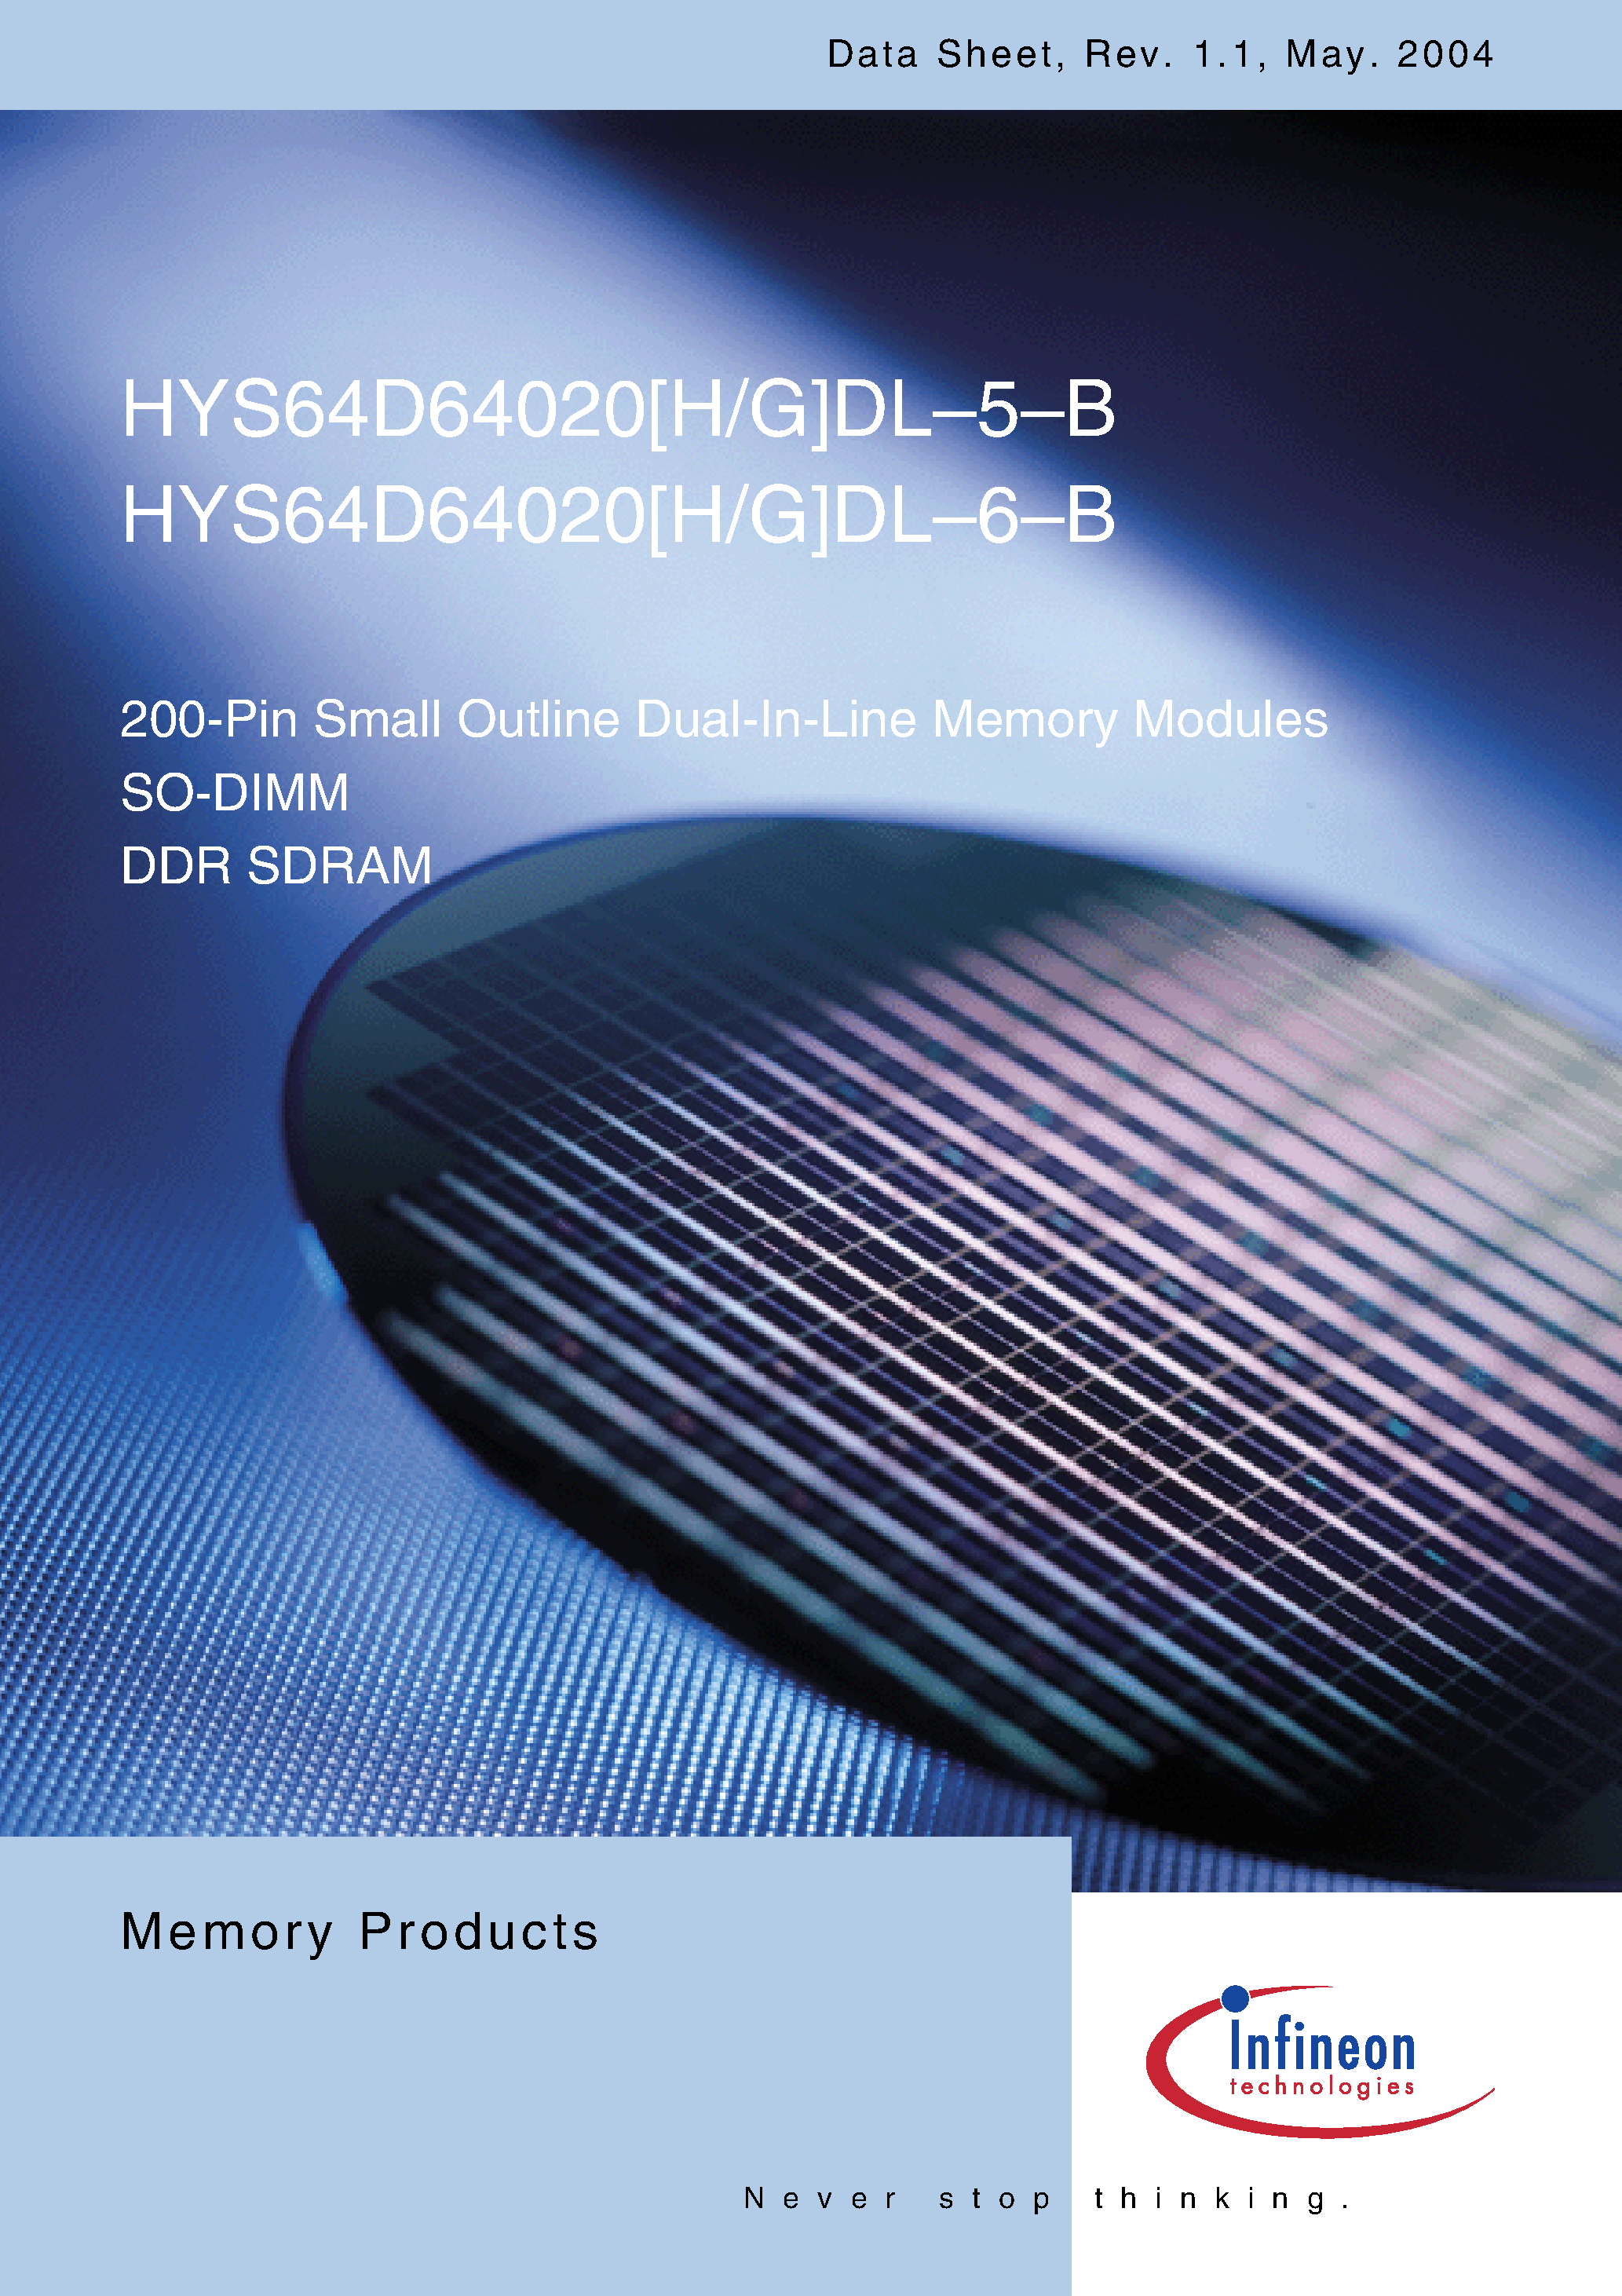 Datasheet HYS64D64020GDL-6-B - 200-Pin Small Outline Dual-In-Line Memory Modules page 1